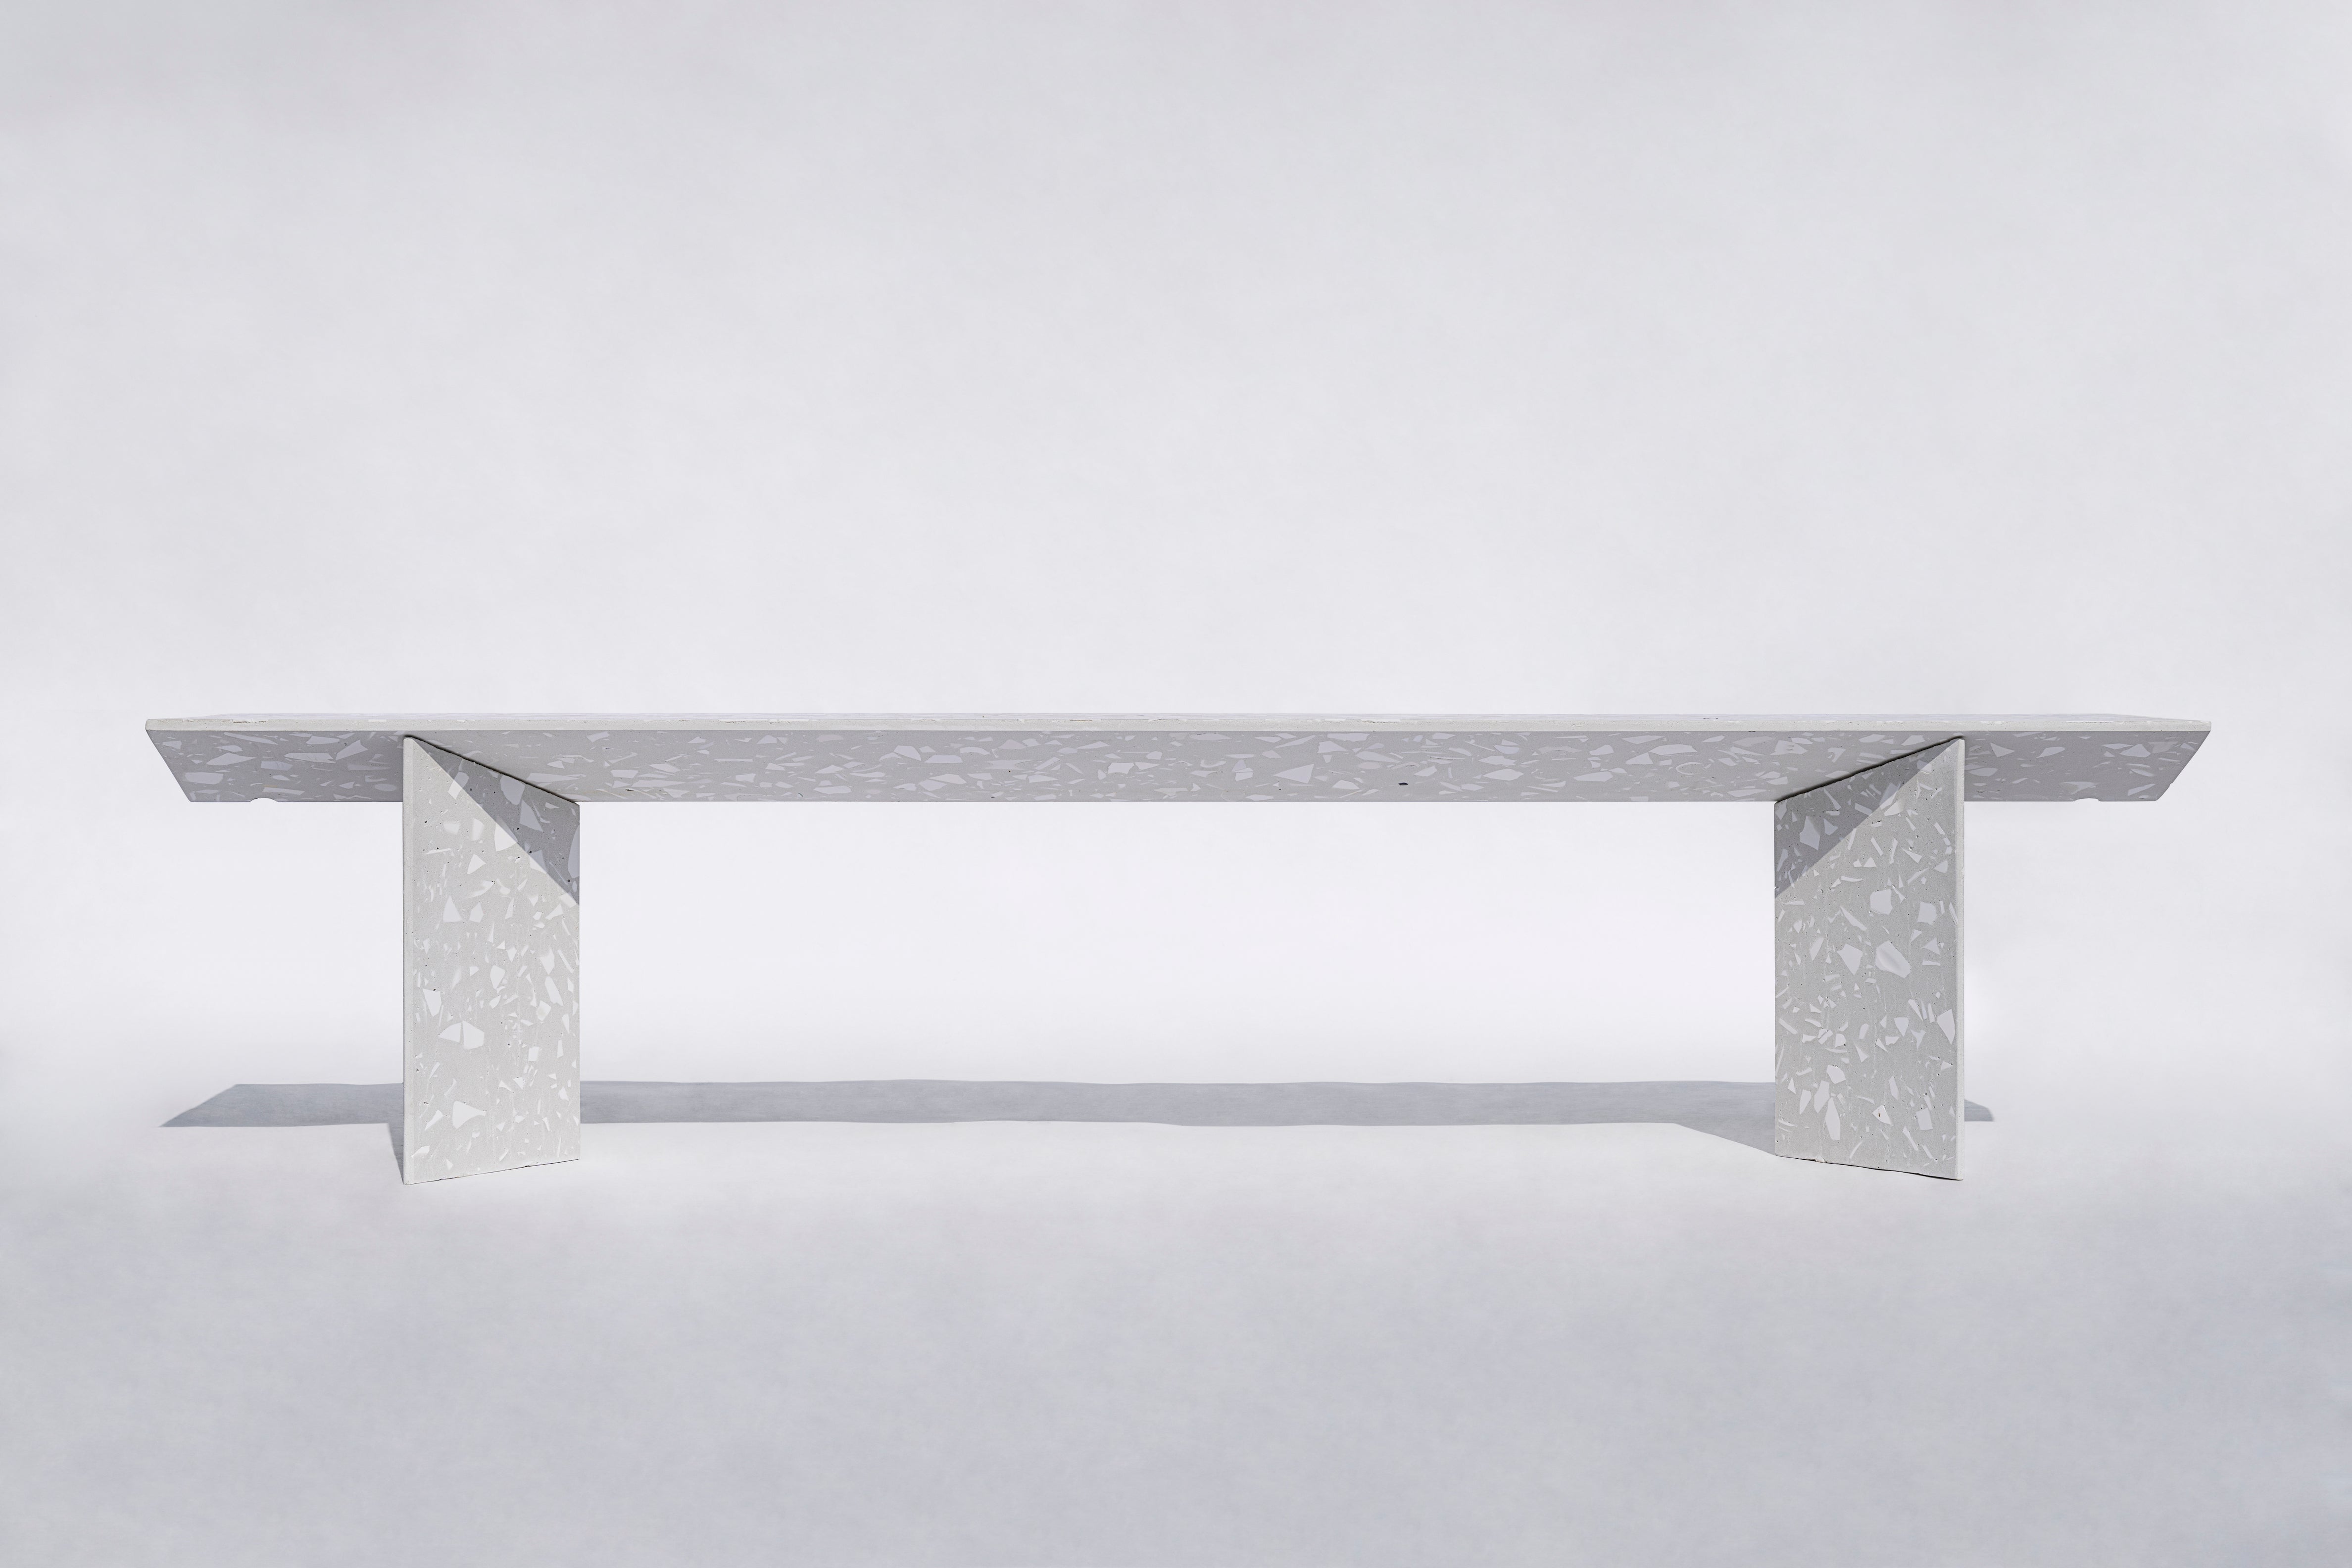 LIANG 1 Bench by Bentu Design

Concrete and ceramic waste / Terrazzo
2000×400×445 mm 
140 kg
Outdoor use: OK

--
Bentu Desing is a Guangzhou-based experimental design studio that explores concepts of product, space and environment through